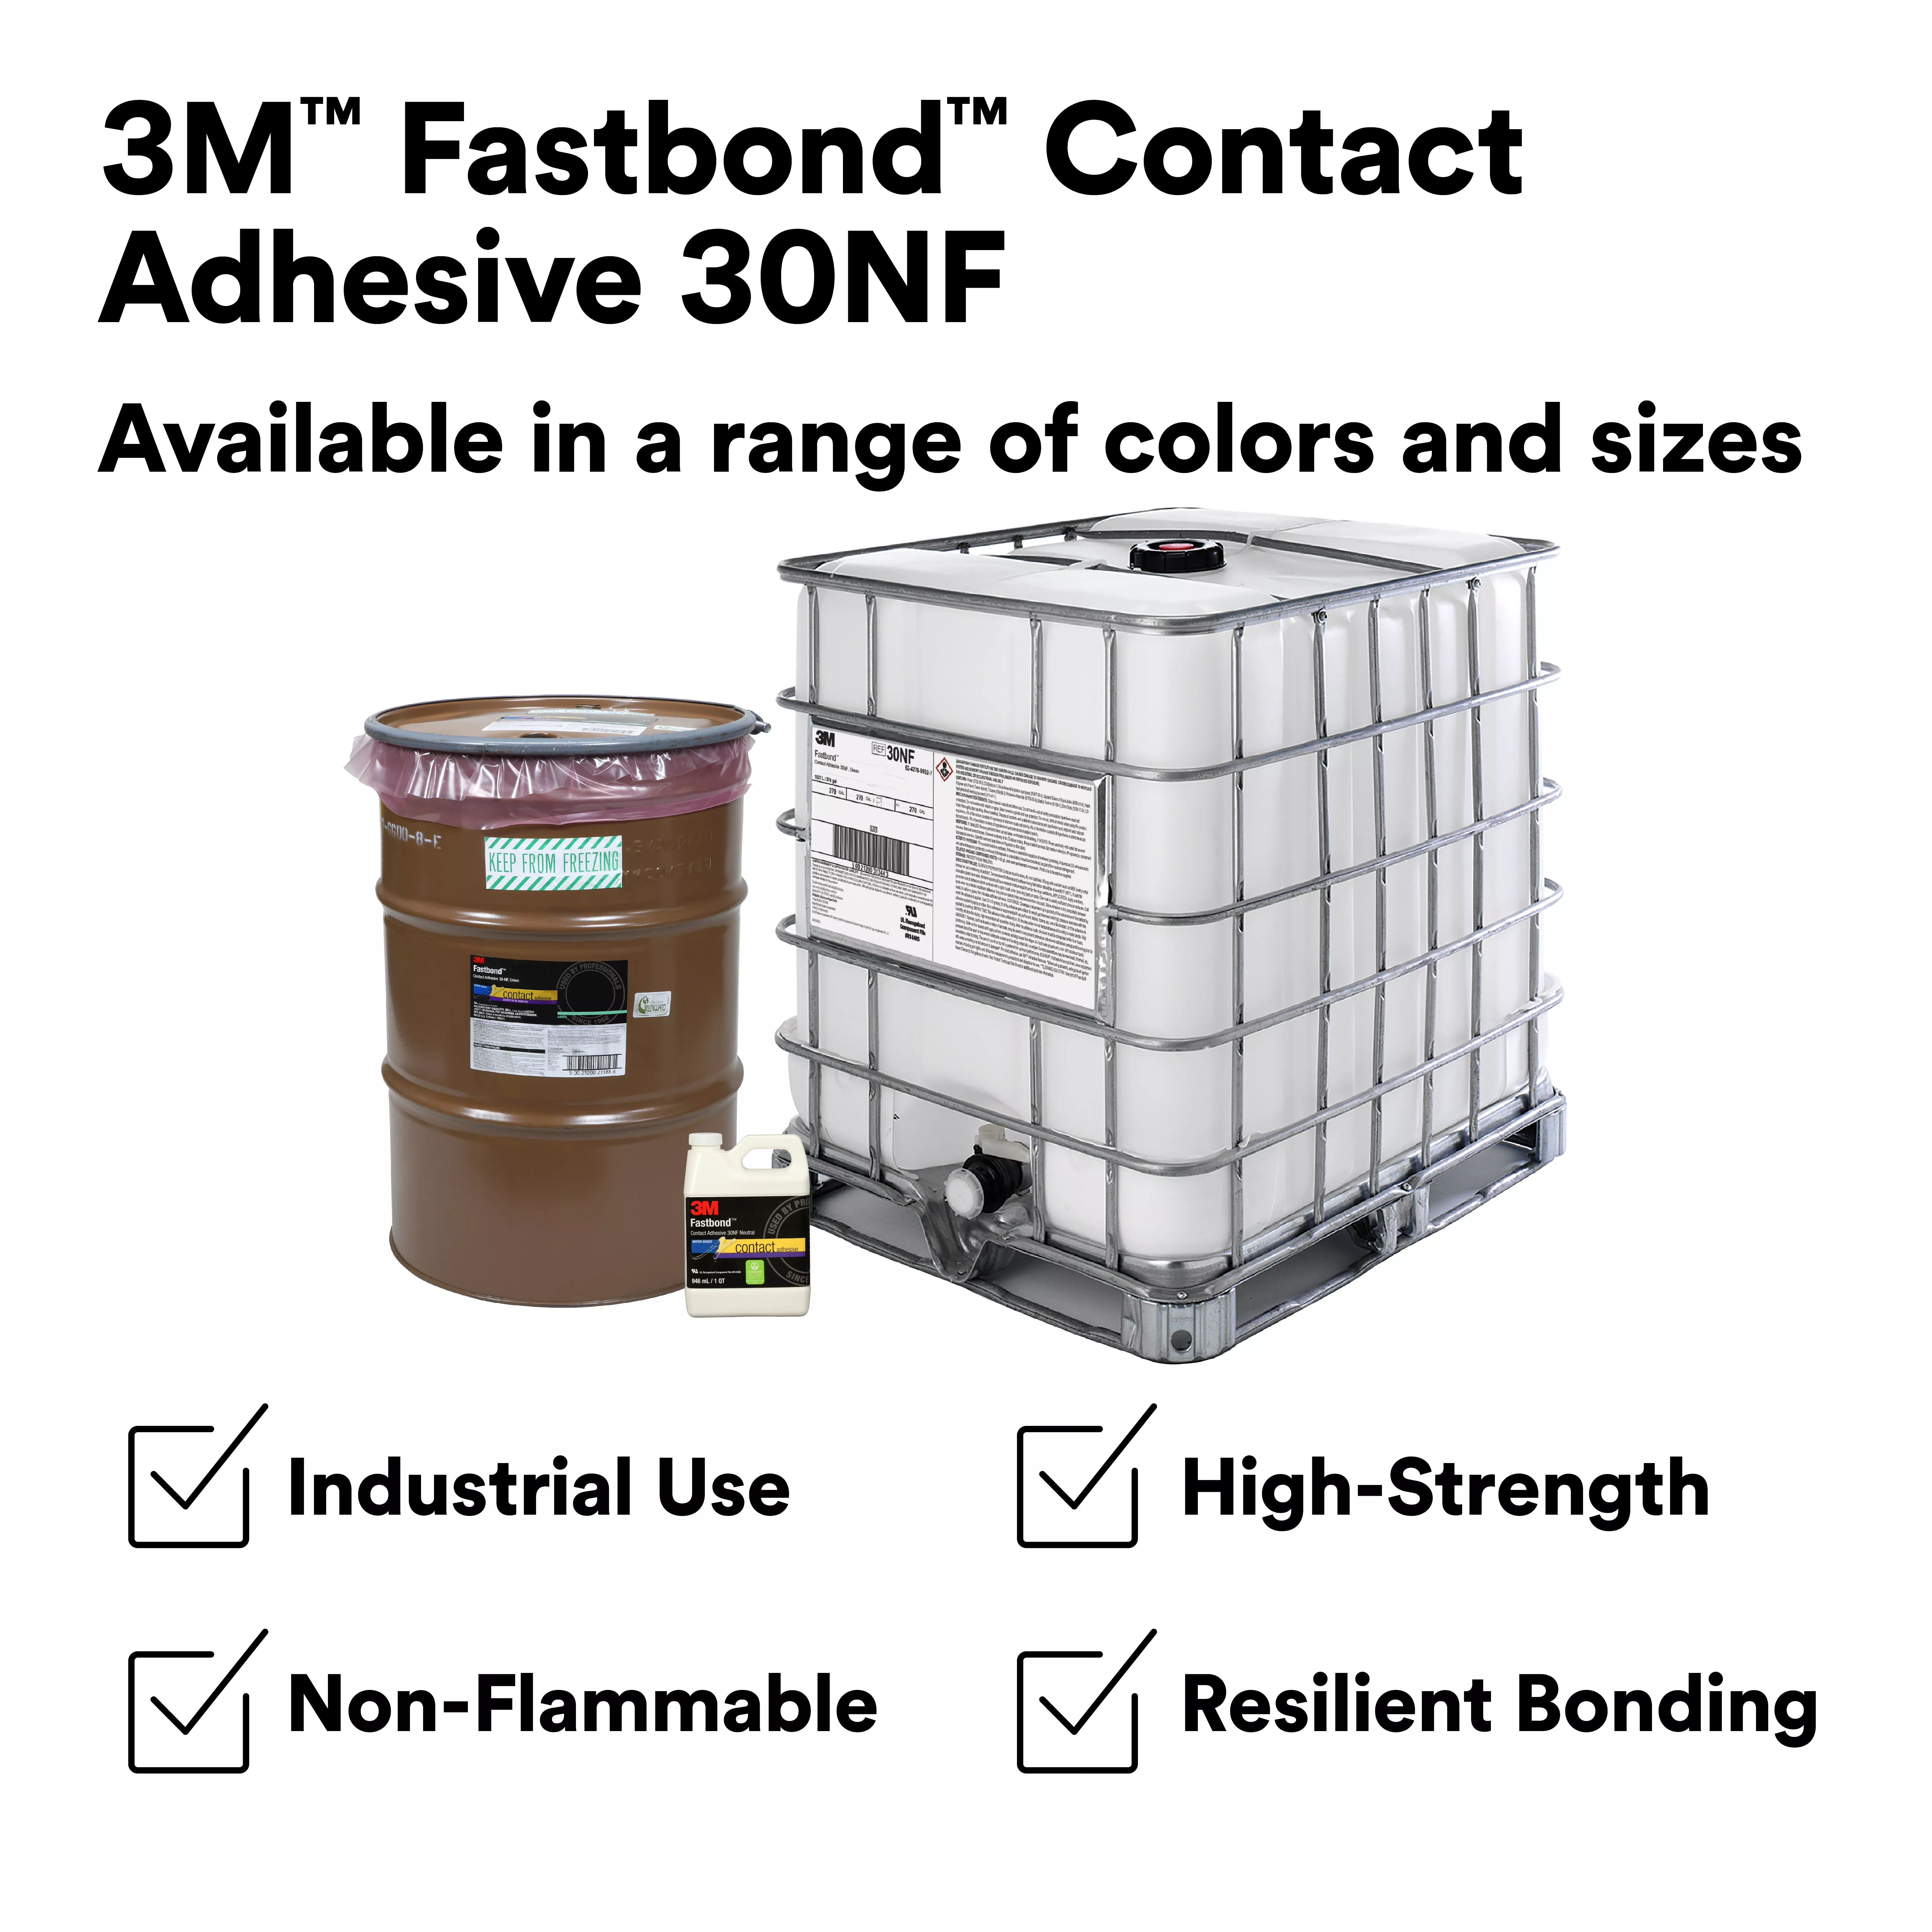 SKU 7100071654 | 3M™ Fastbond™ Contact Adhesive 30NF